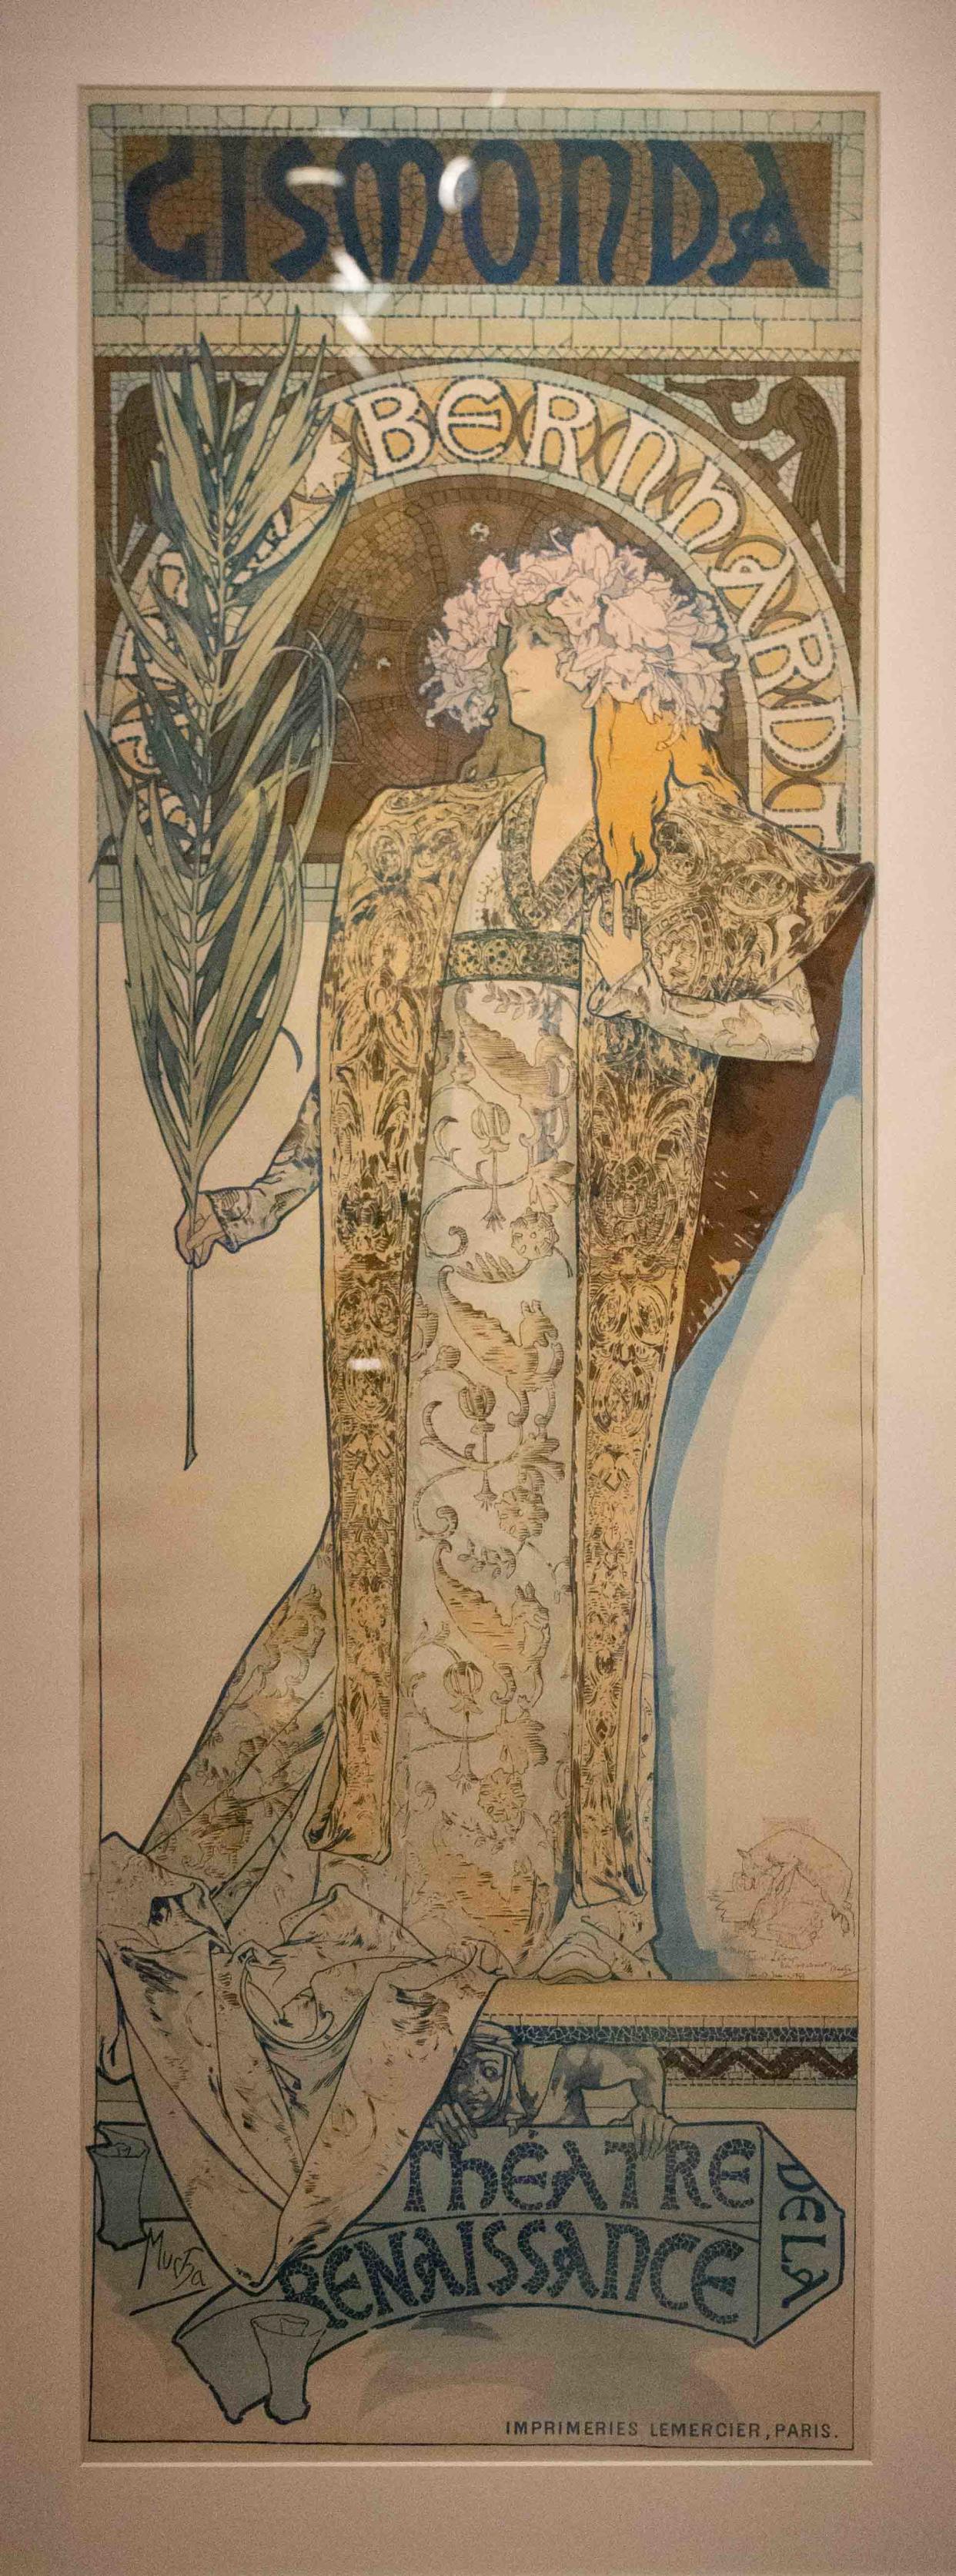 Gismonda, 1894. Color lithograph on paper mounted on linen (with remarque by Mucha at bottom right) at the Flagler Museum, Winter Exhibition, Alphonse Mucha: Master of Art Nouveau. On view through April 14, 2024.